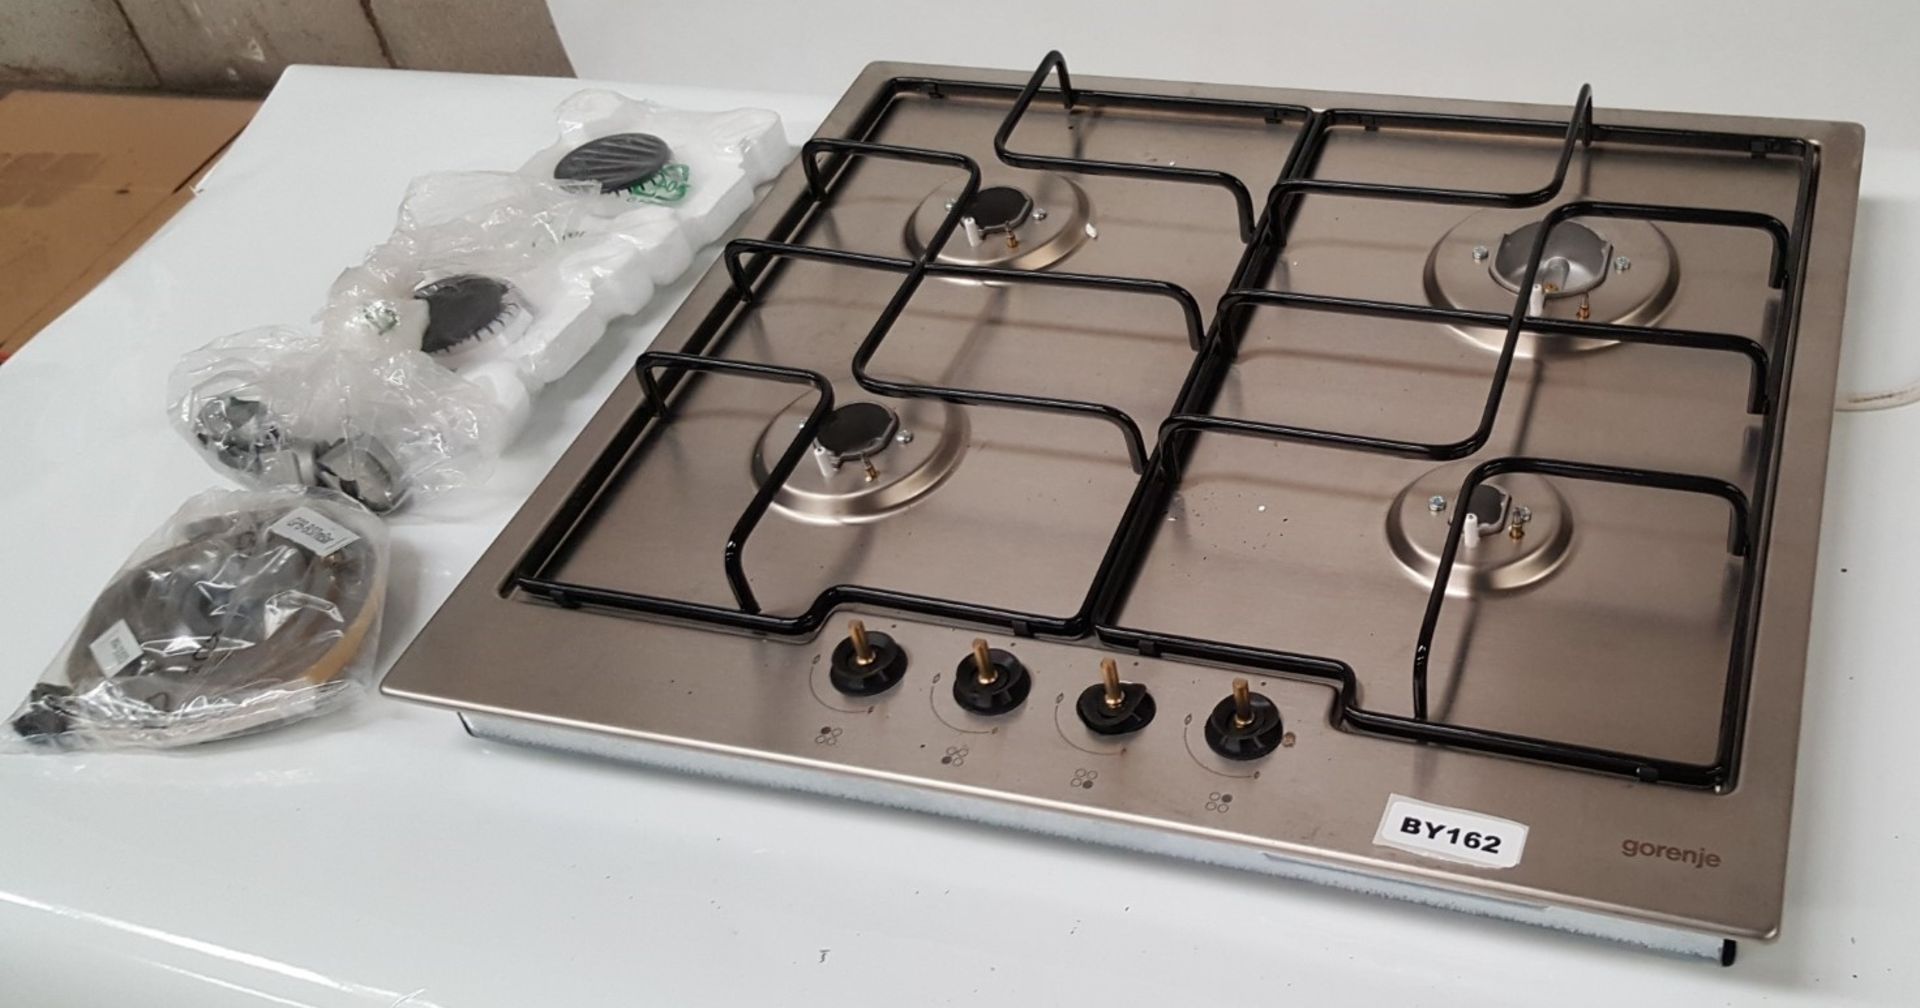 1 x Gorenje G6N4AX 60cm Gas Hob Stainless Steel - Ref BY162 - Image 3 of 5